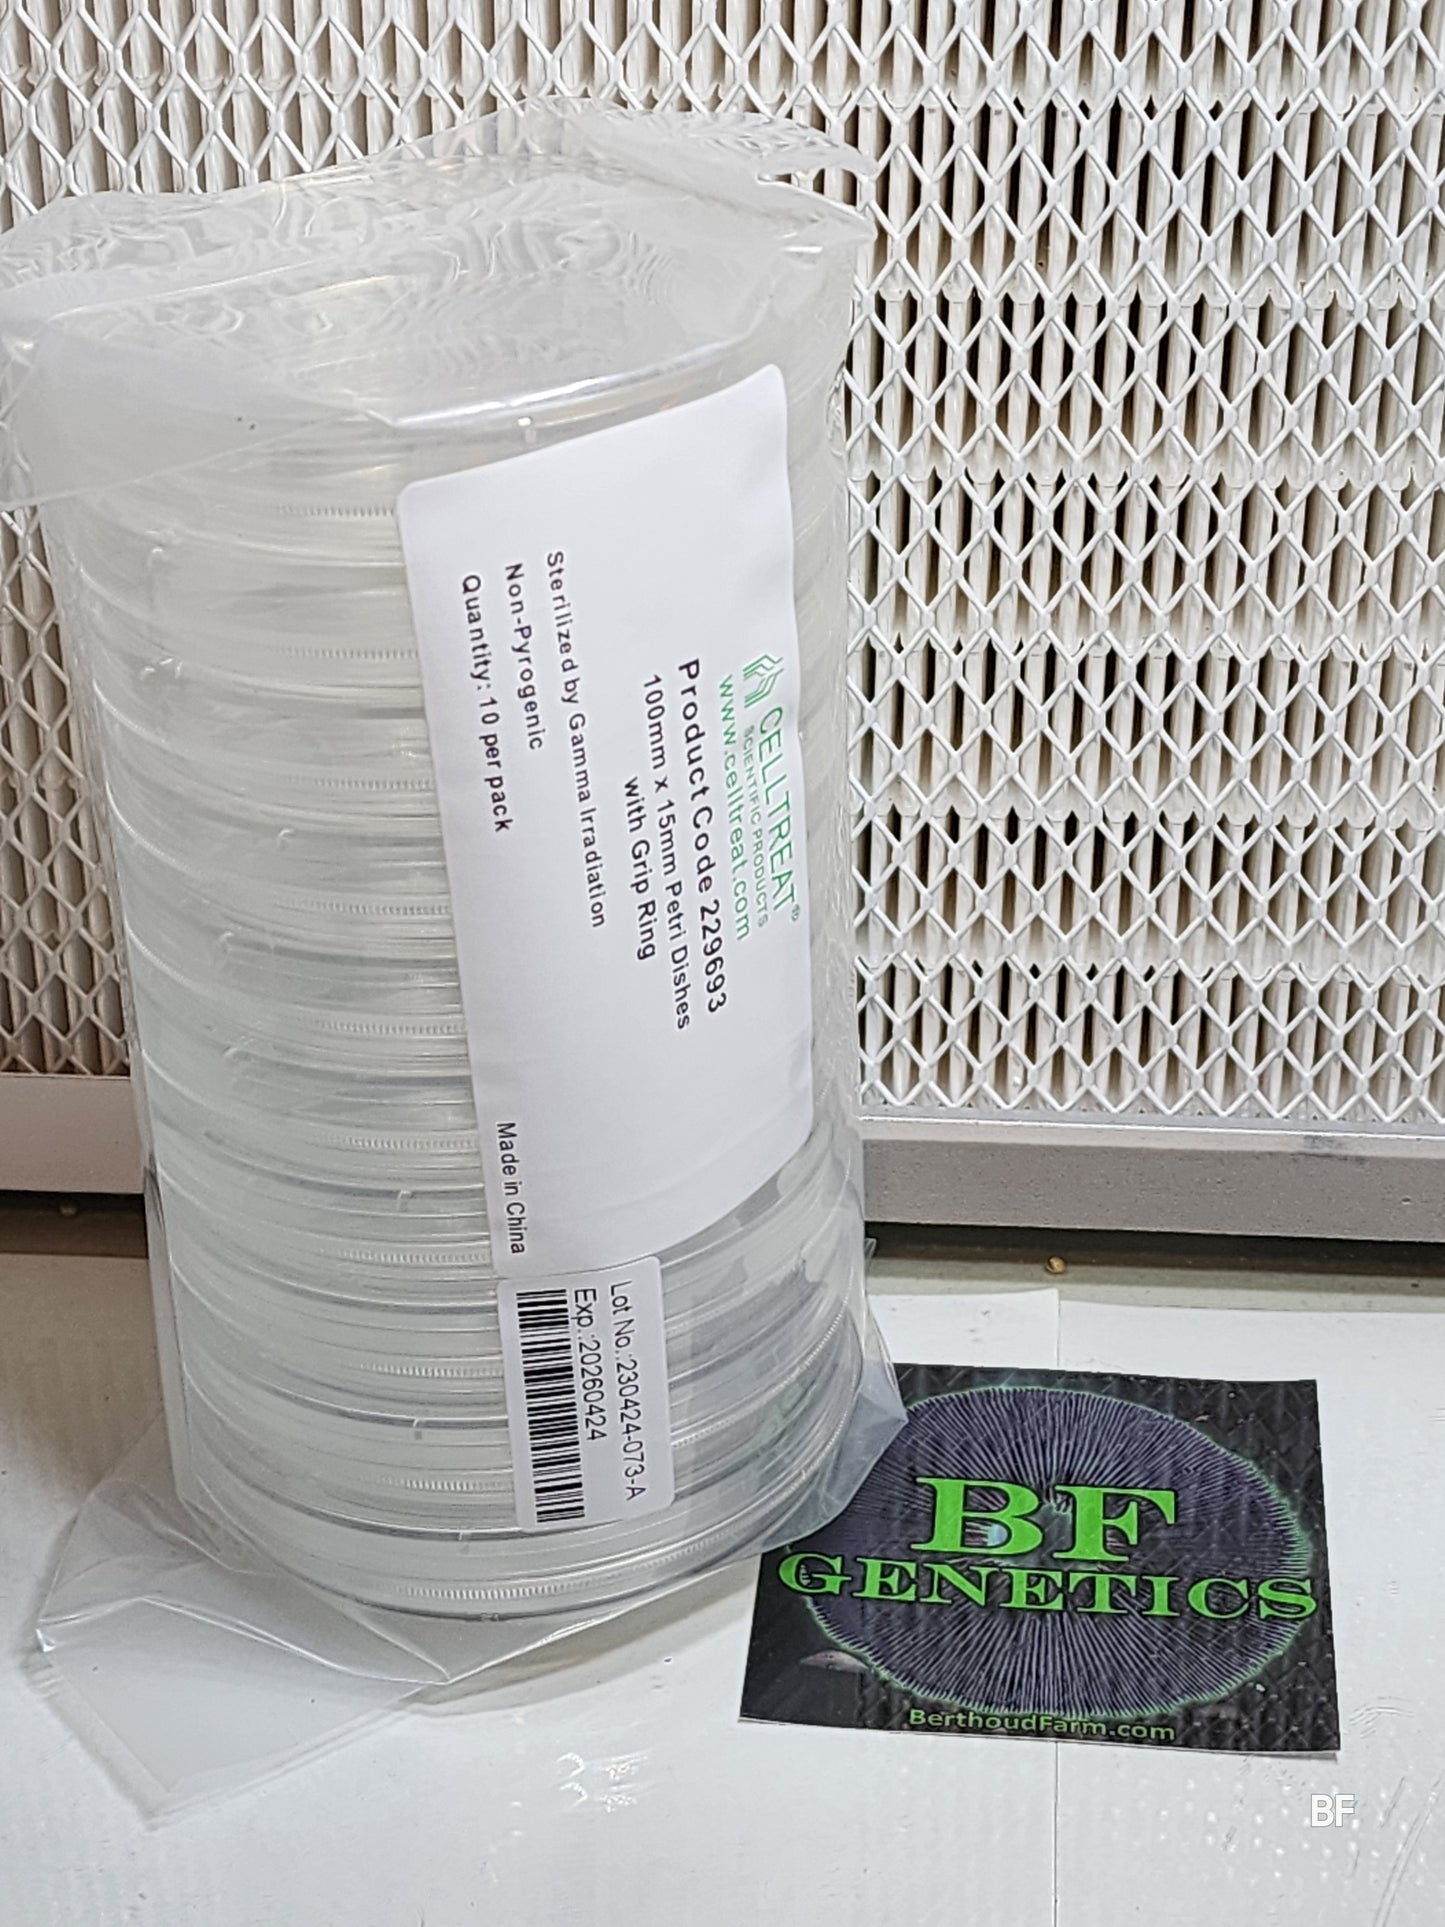 Celltreat 100mm x 15mm Petri Dishes with Grip Ring (10 Pack)